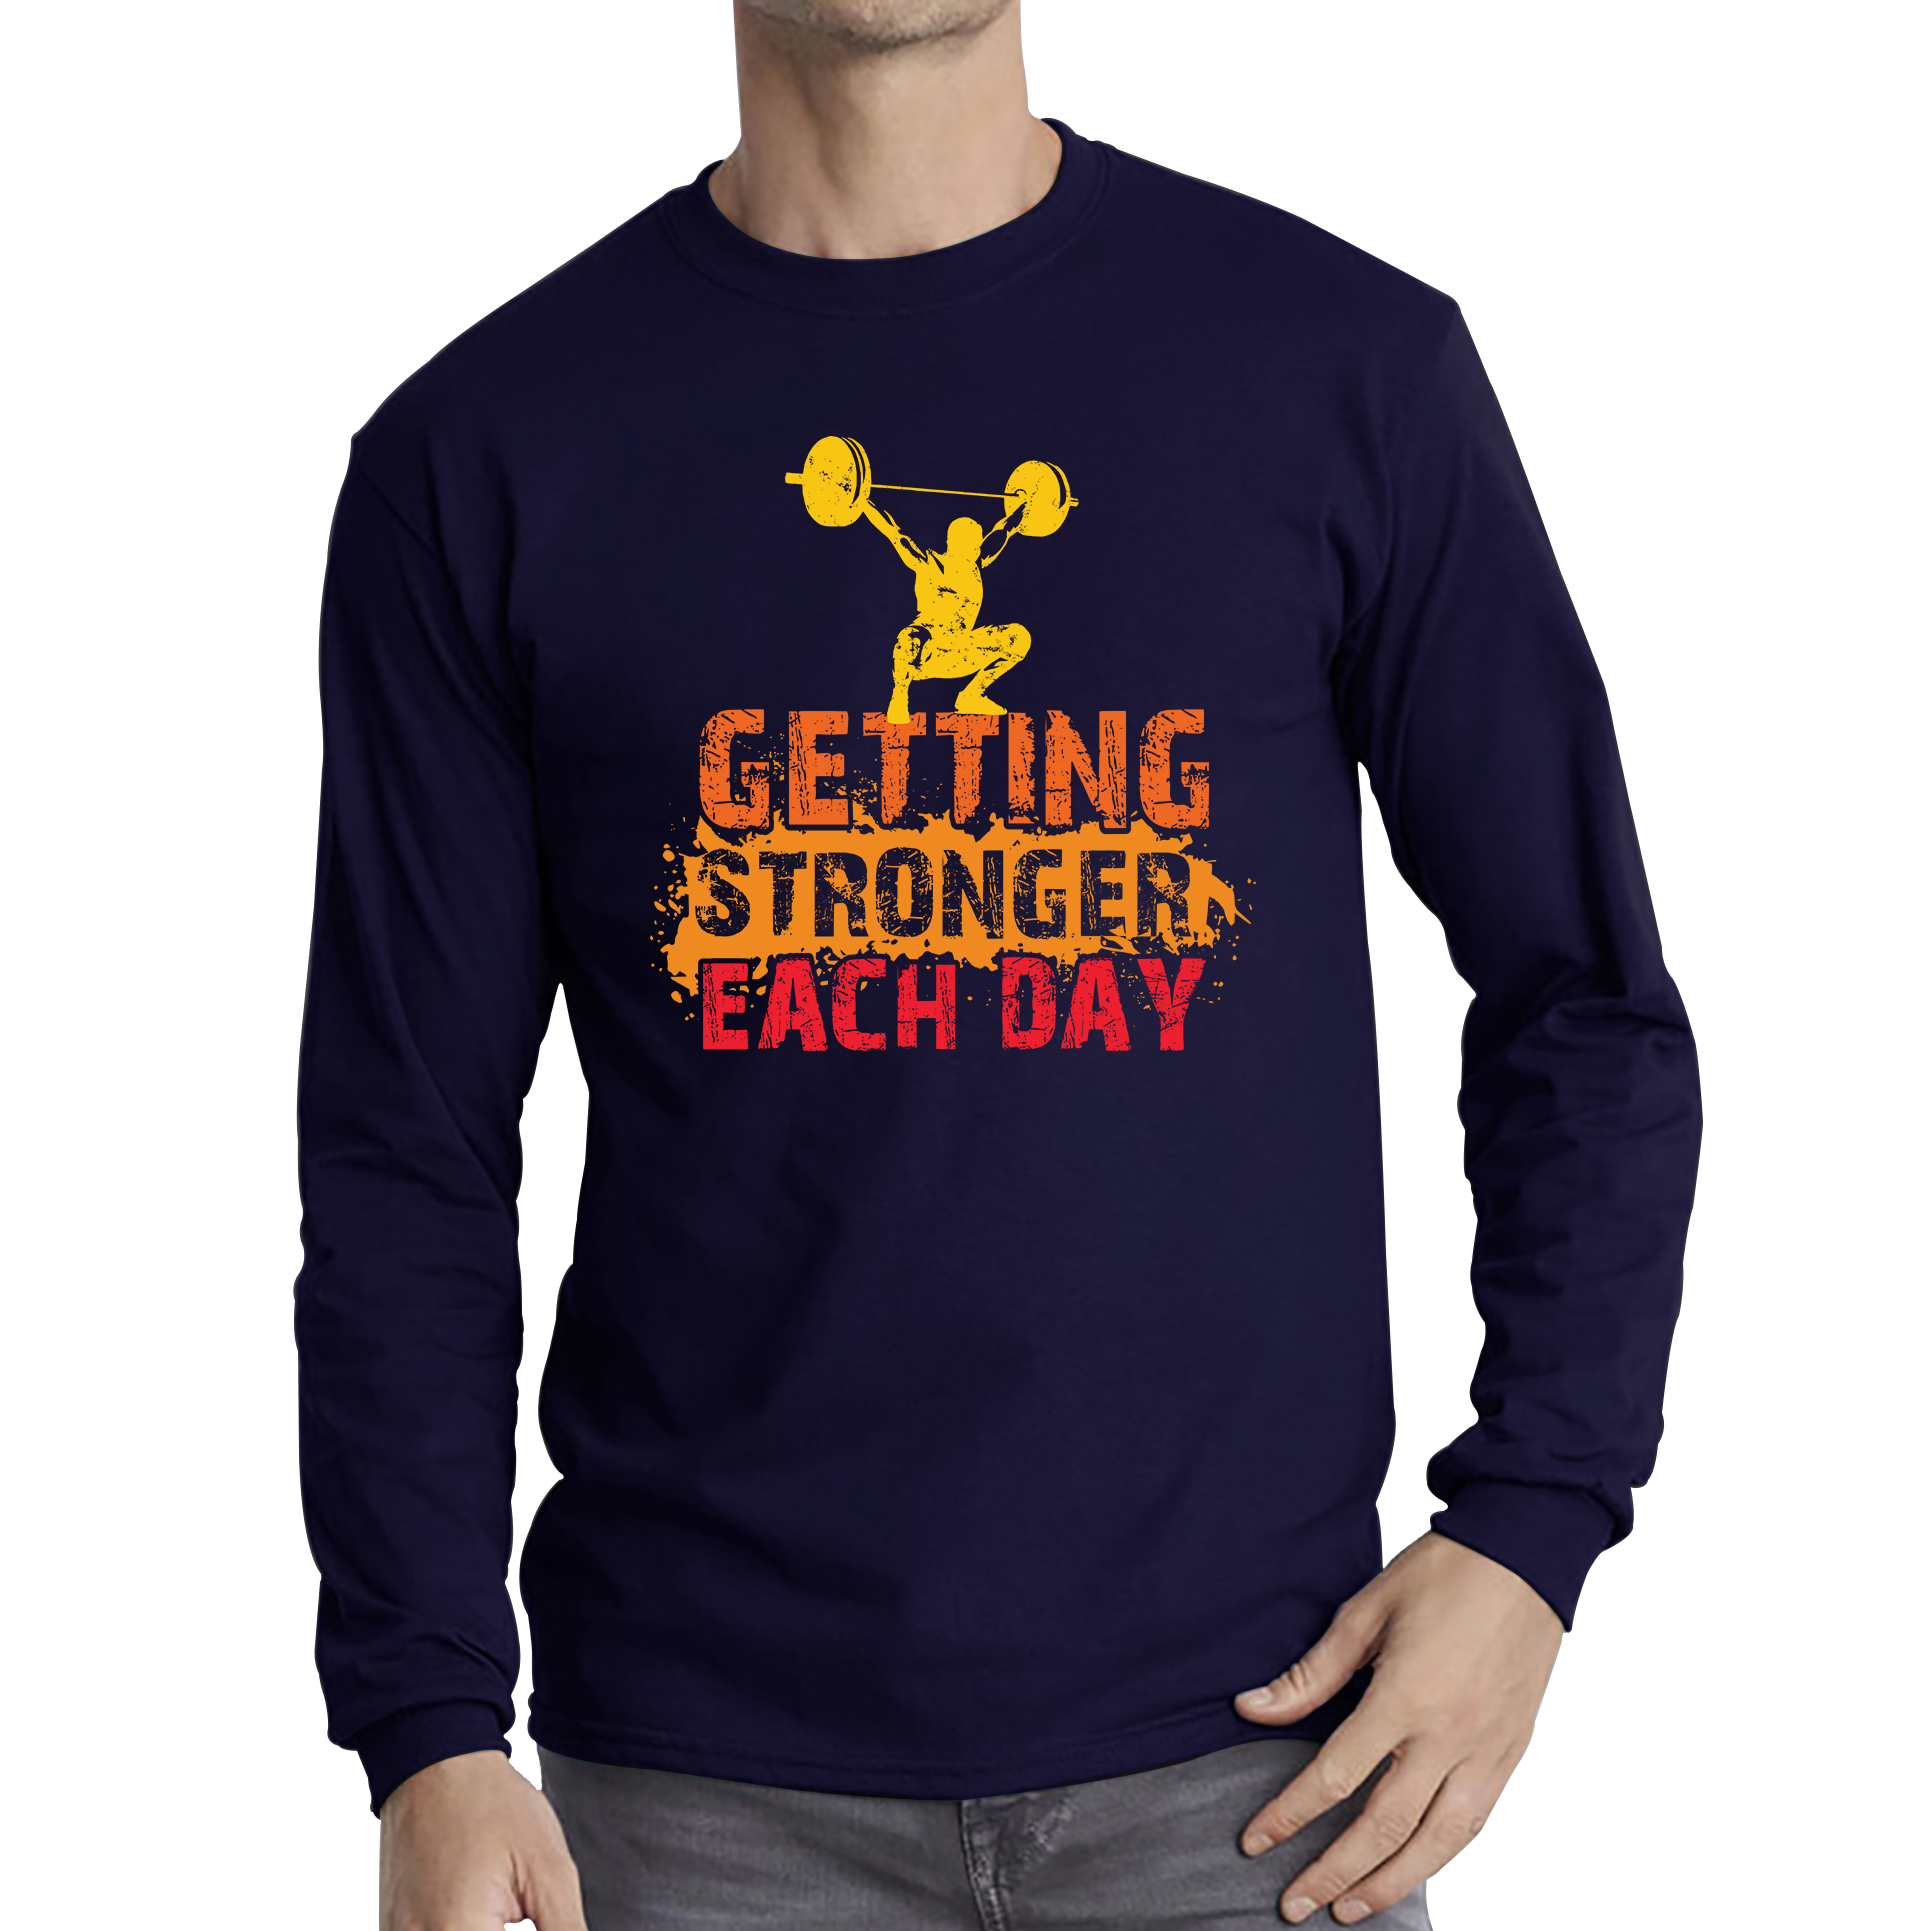 Getting Stronger Each Day Gym Training Workout Gym Lover Bodybuilding Weightlifting Fitness Motivational Long Sleeve T Shirt